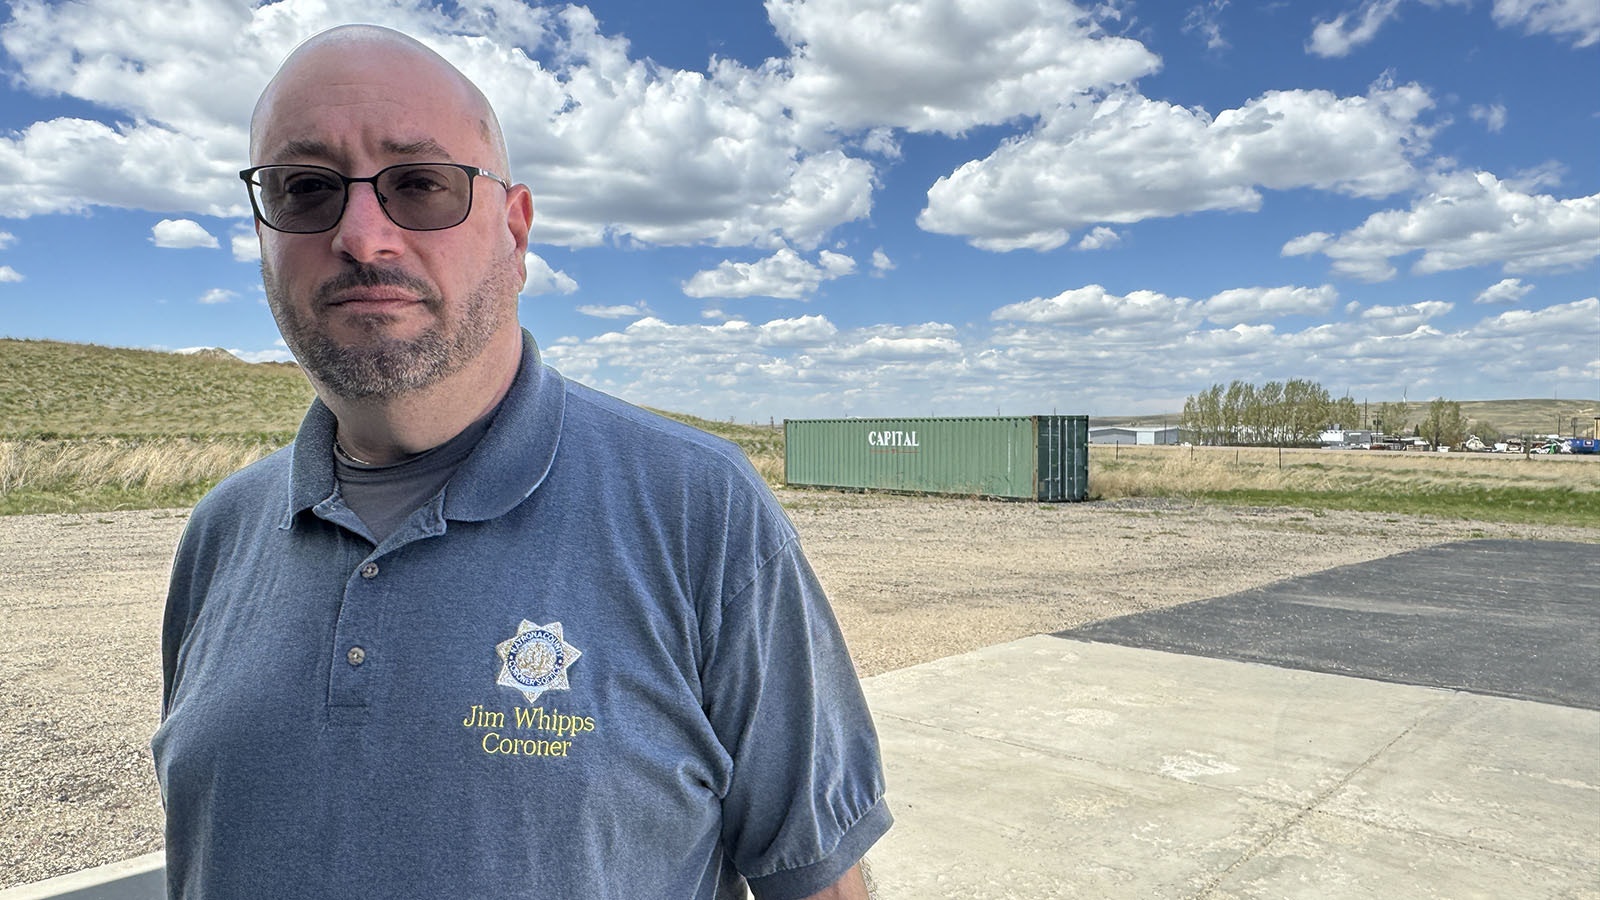 Natrona County Coroner James Whipps is dealing with having to find the next of kin for cremated remains of “indigent” people handed over to him by local funeral homes. The green intermodal container behind him is filled with coroner archives that he considered moving out to make room for the cremated remains of local people when he first learned in late 2022 that he might have his hands full.